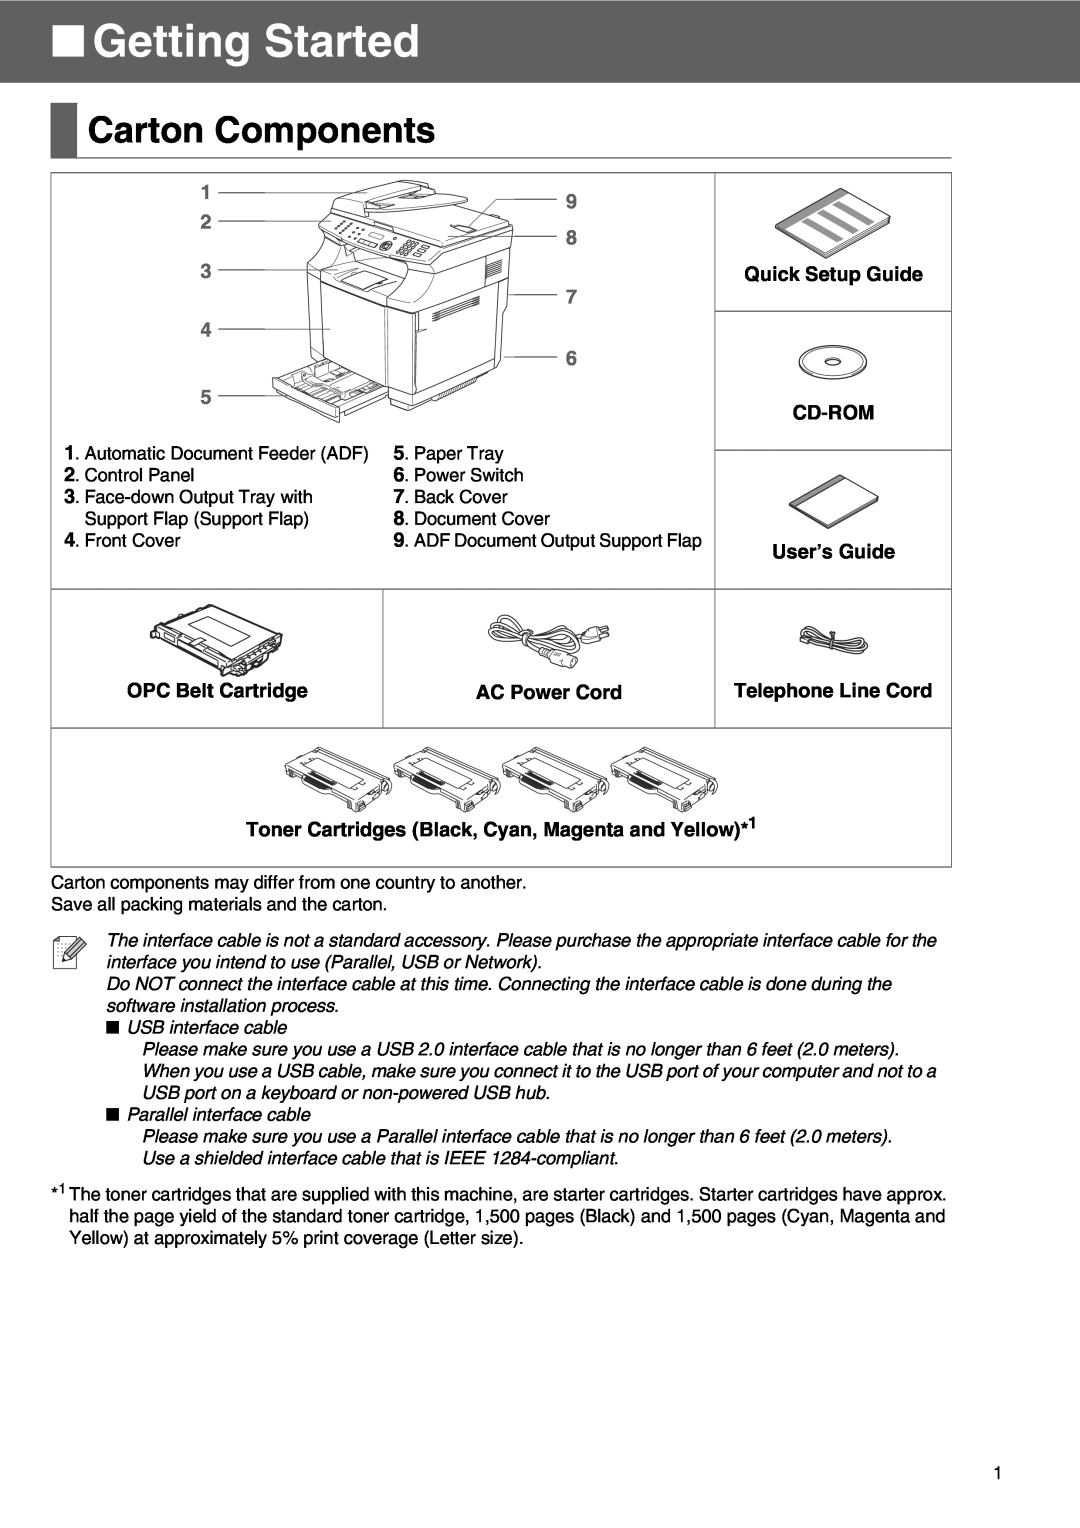 Microsoft SPC210SF setup guide Getting Started, Carton Components, OPC Belt Cartridge, AC Power Cord, User’s Guide 